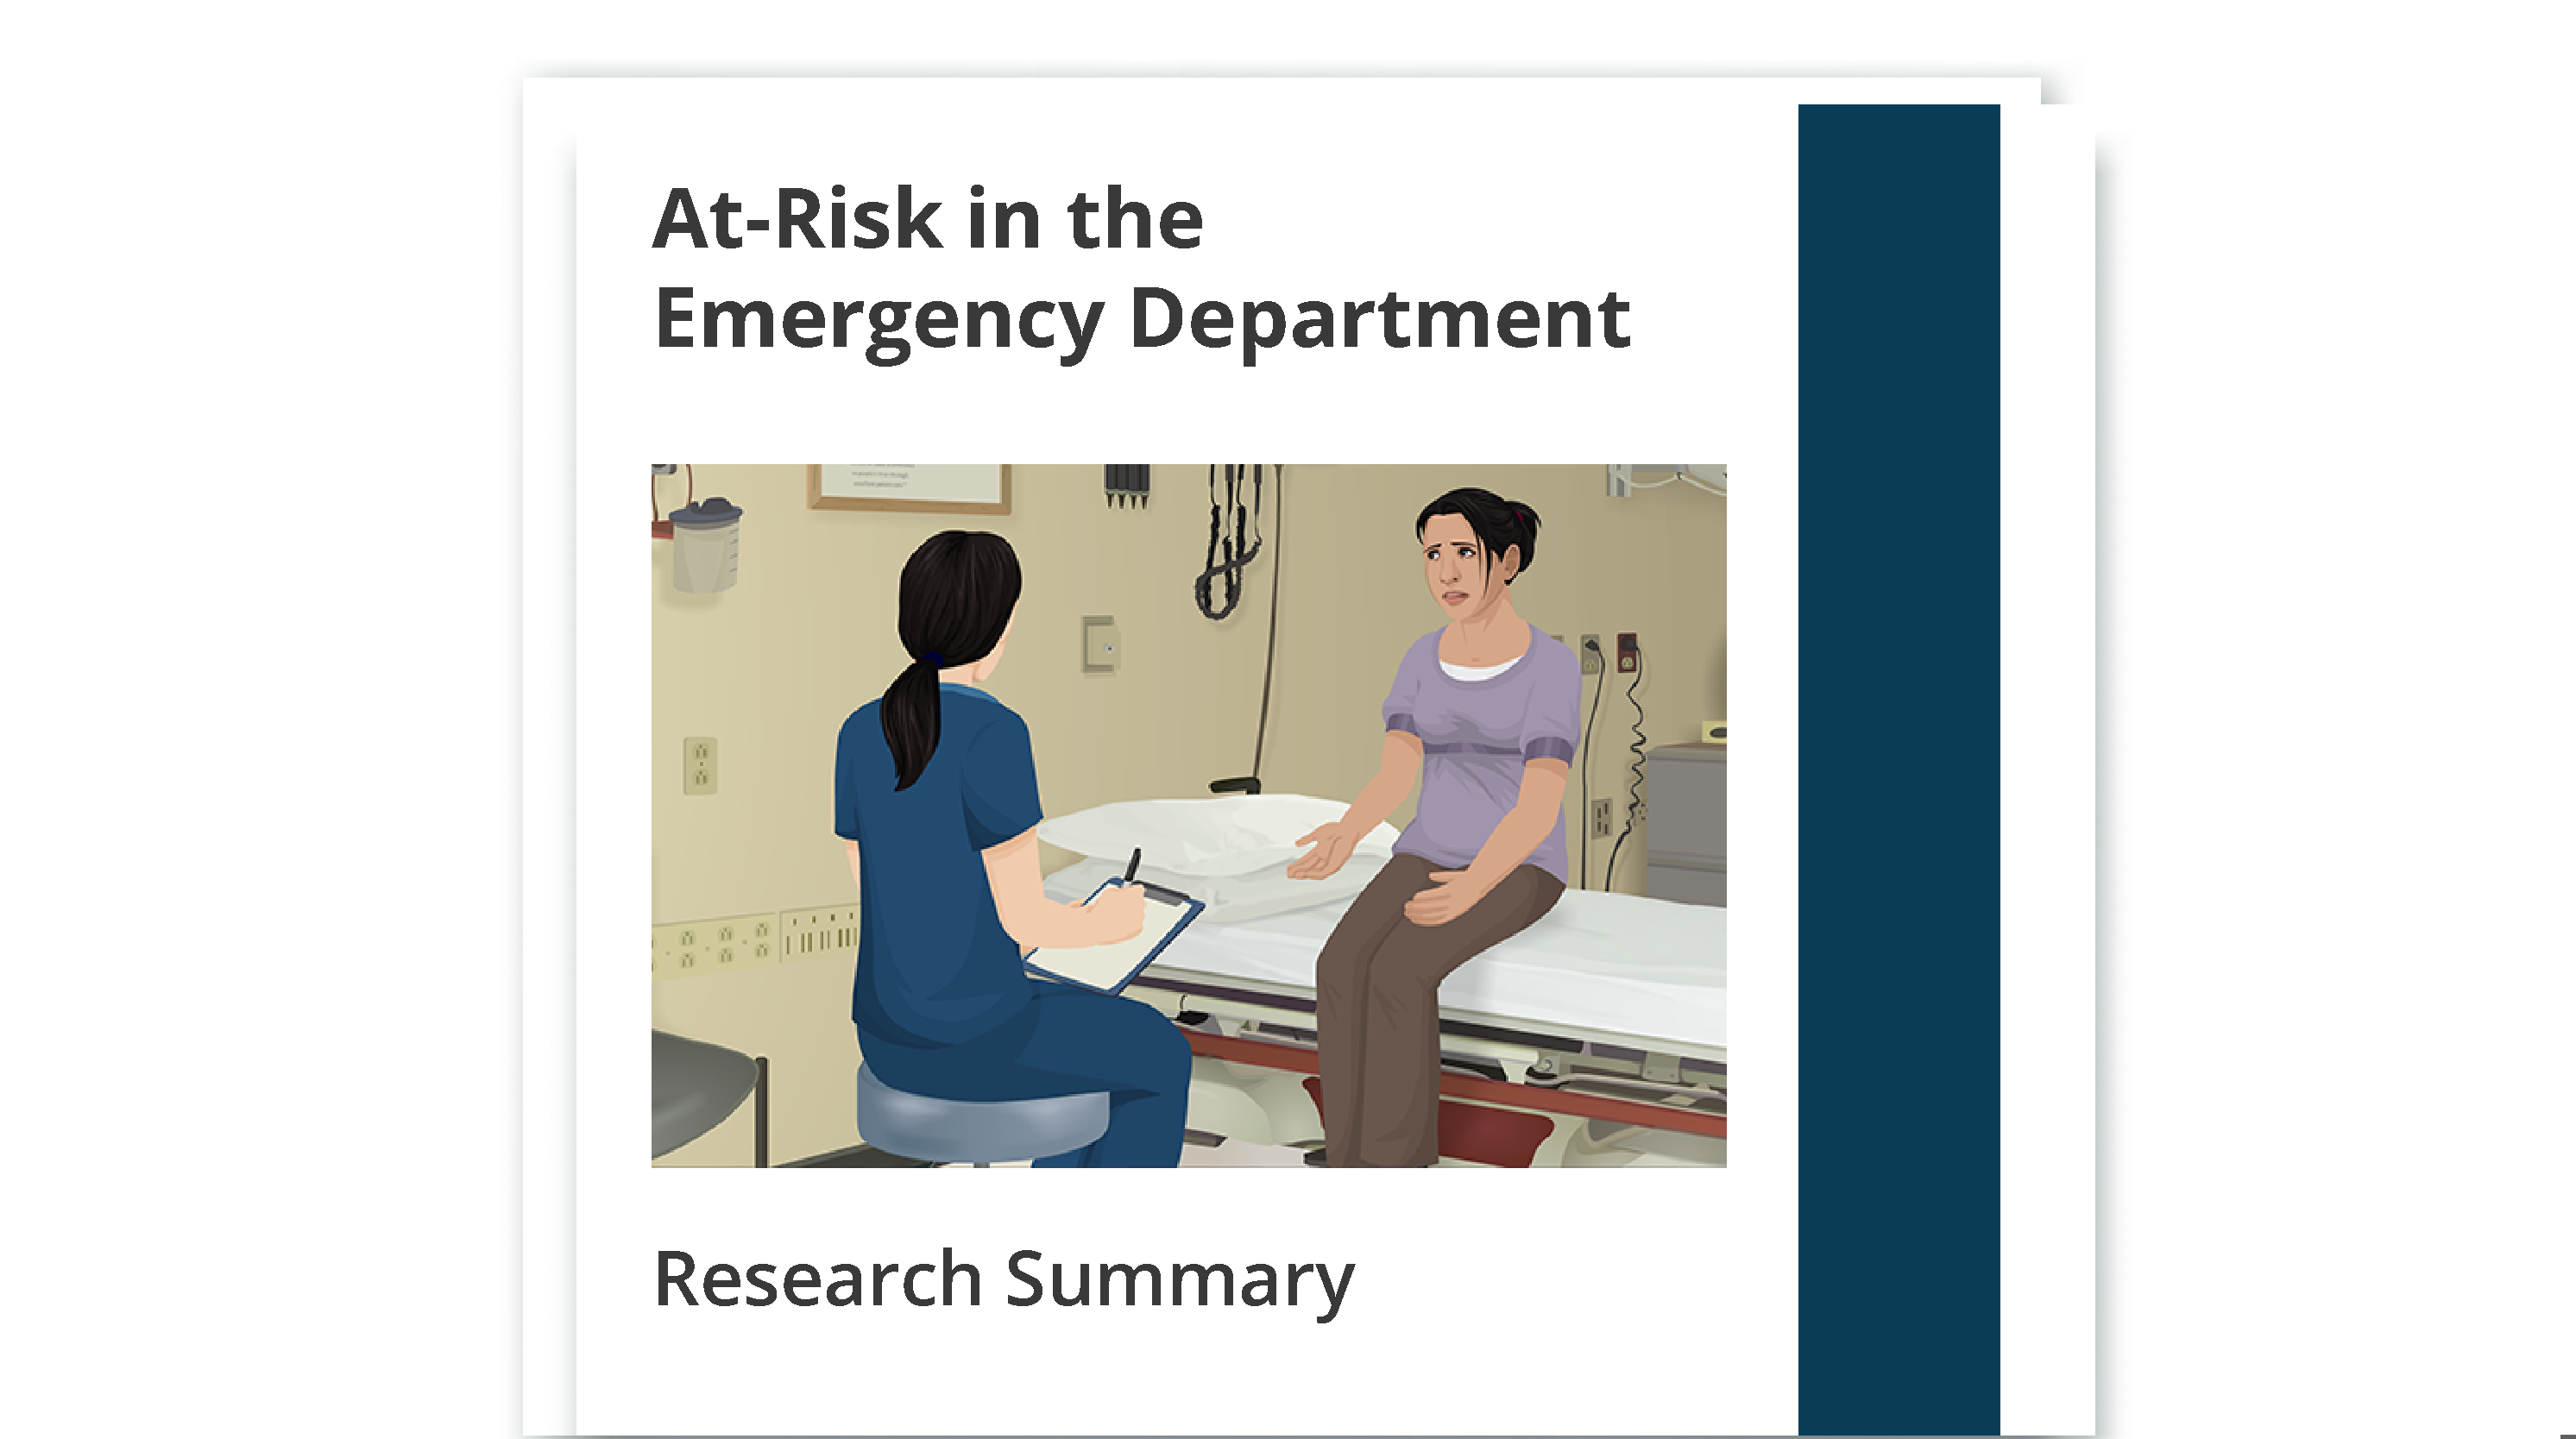 At-Risk in the Emergency Department